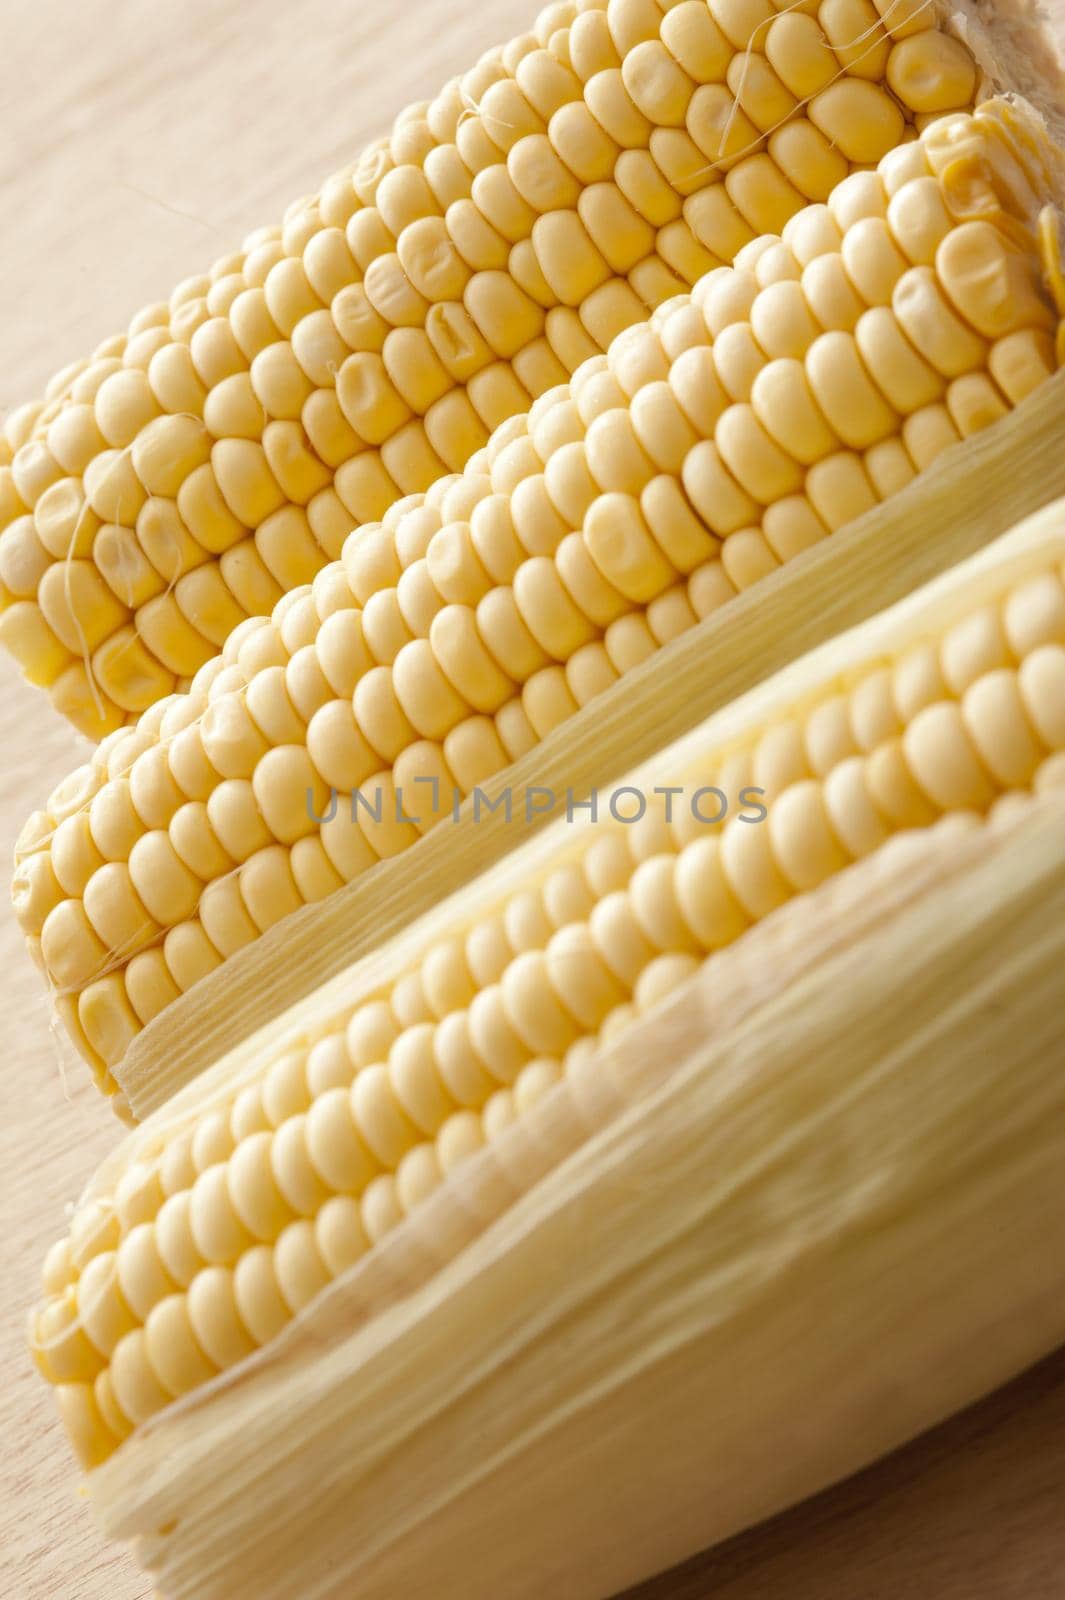 Three fresh uncooked dehusked sweet corn on the cob ready to be prepared for a delicious snack or vegetable accompaniment to a meal, close up view in an oblique row